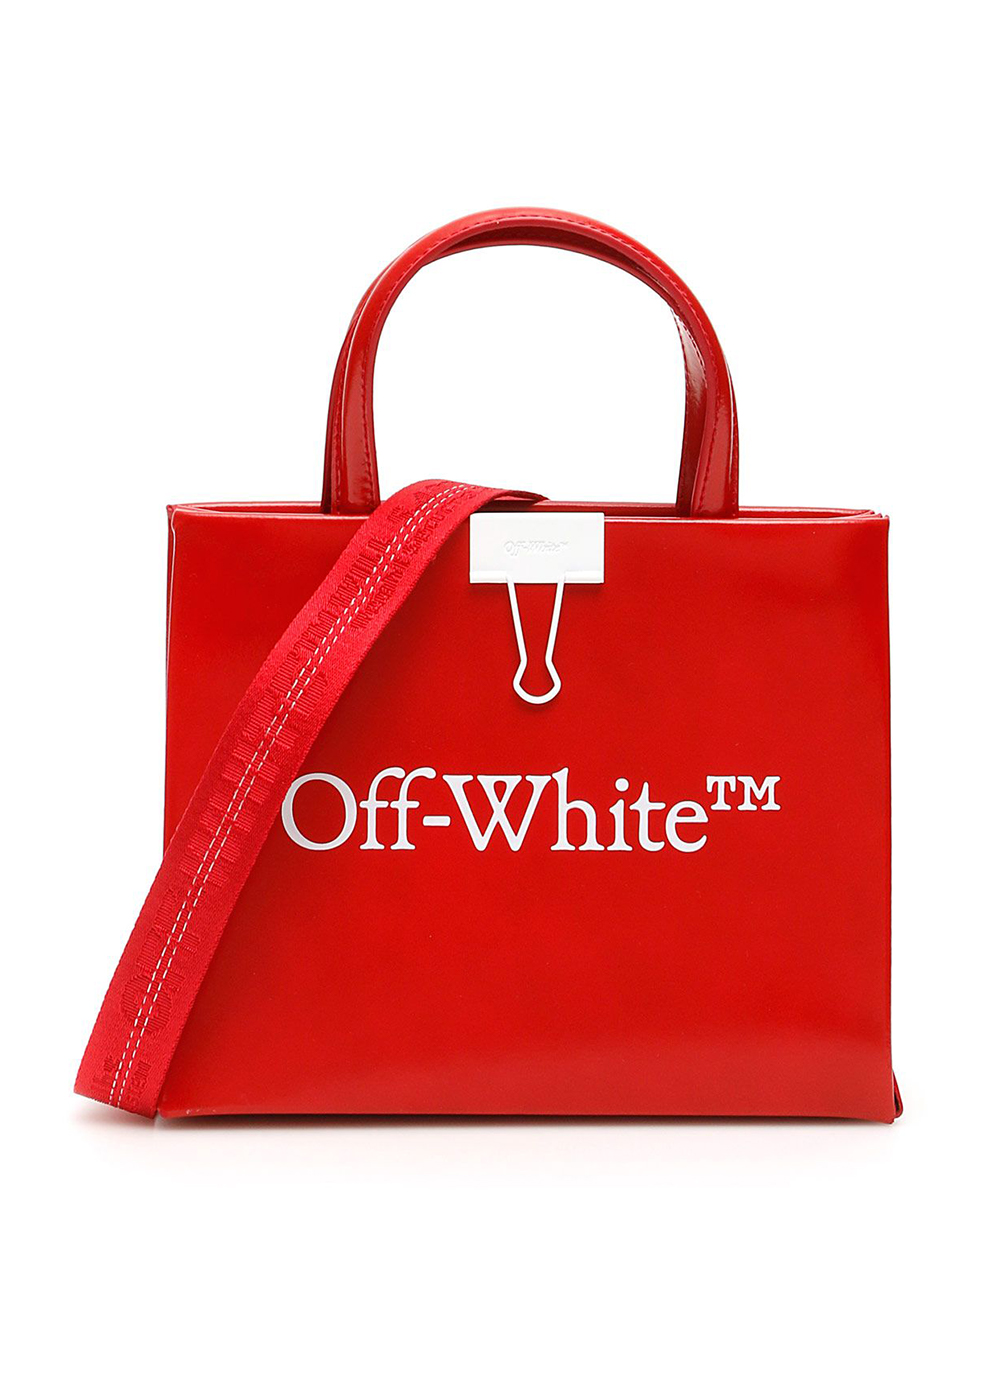 OFF-WHITE Red Leather Box Bag Mini Red/White in Leather with White ...